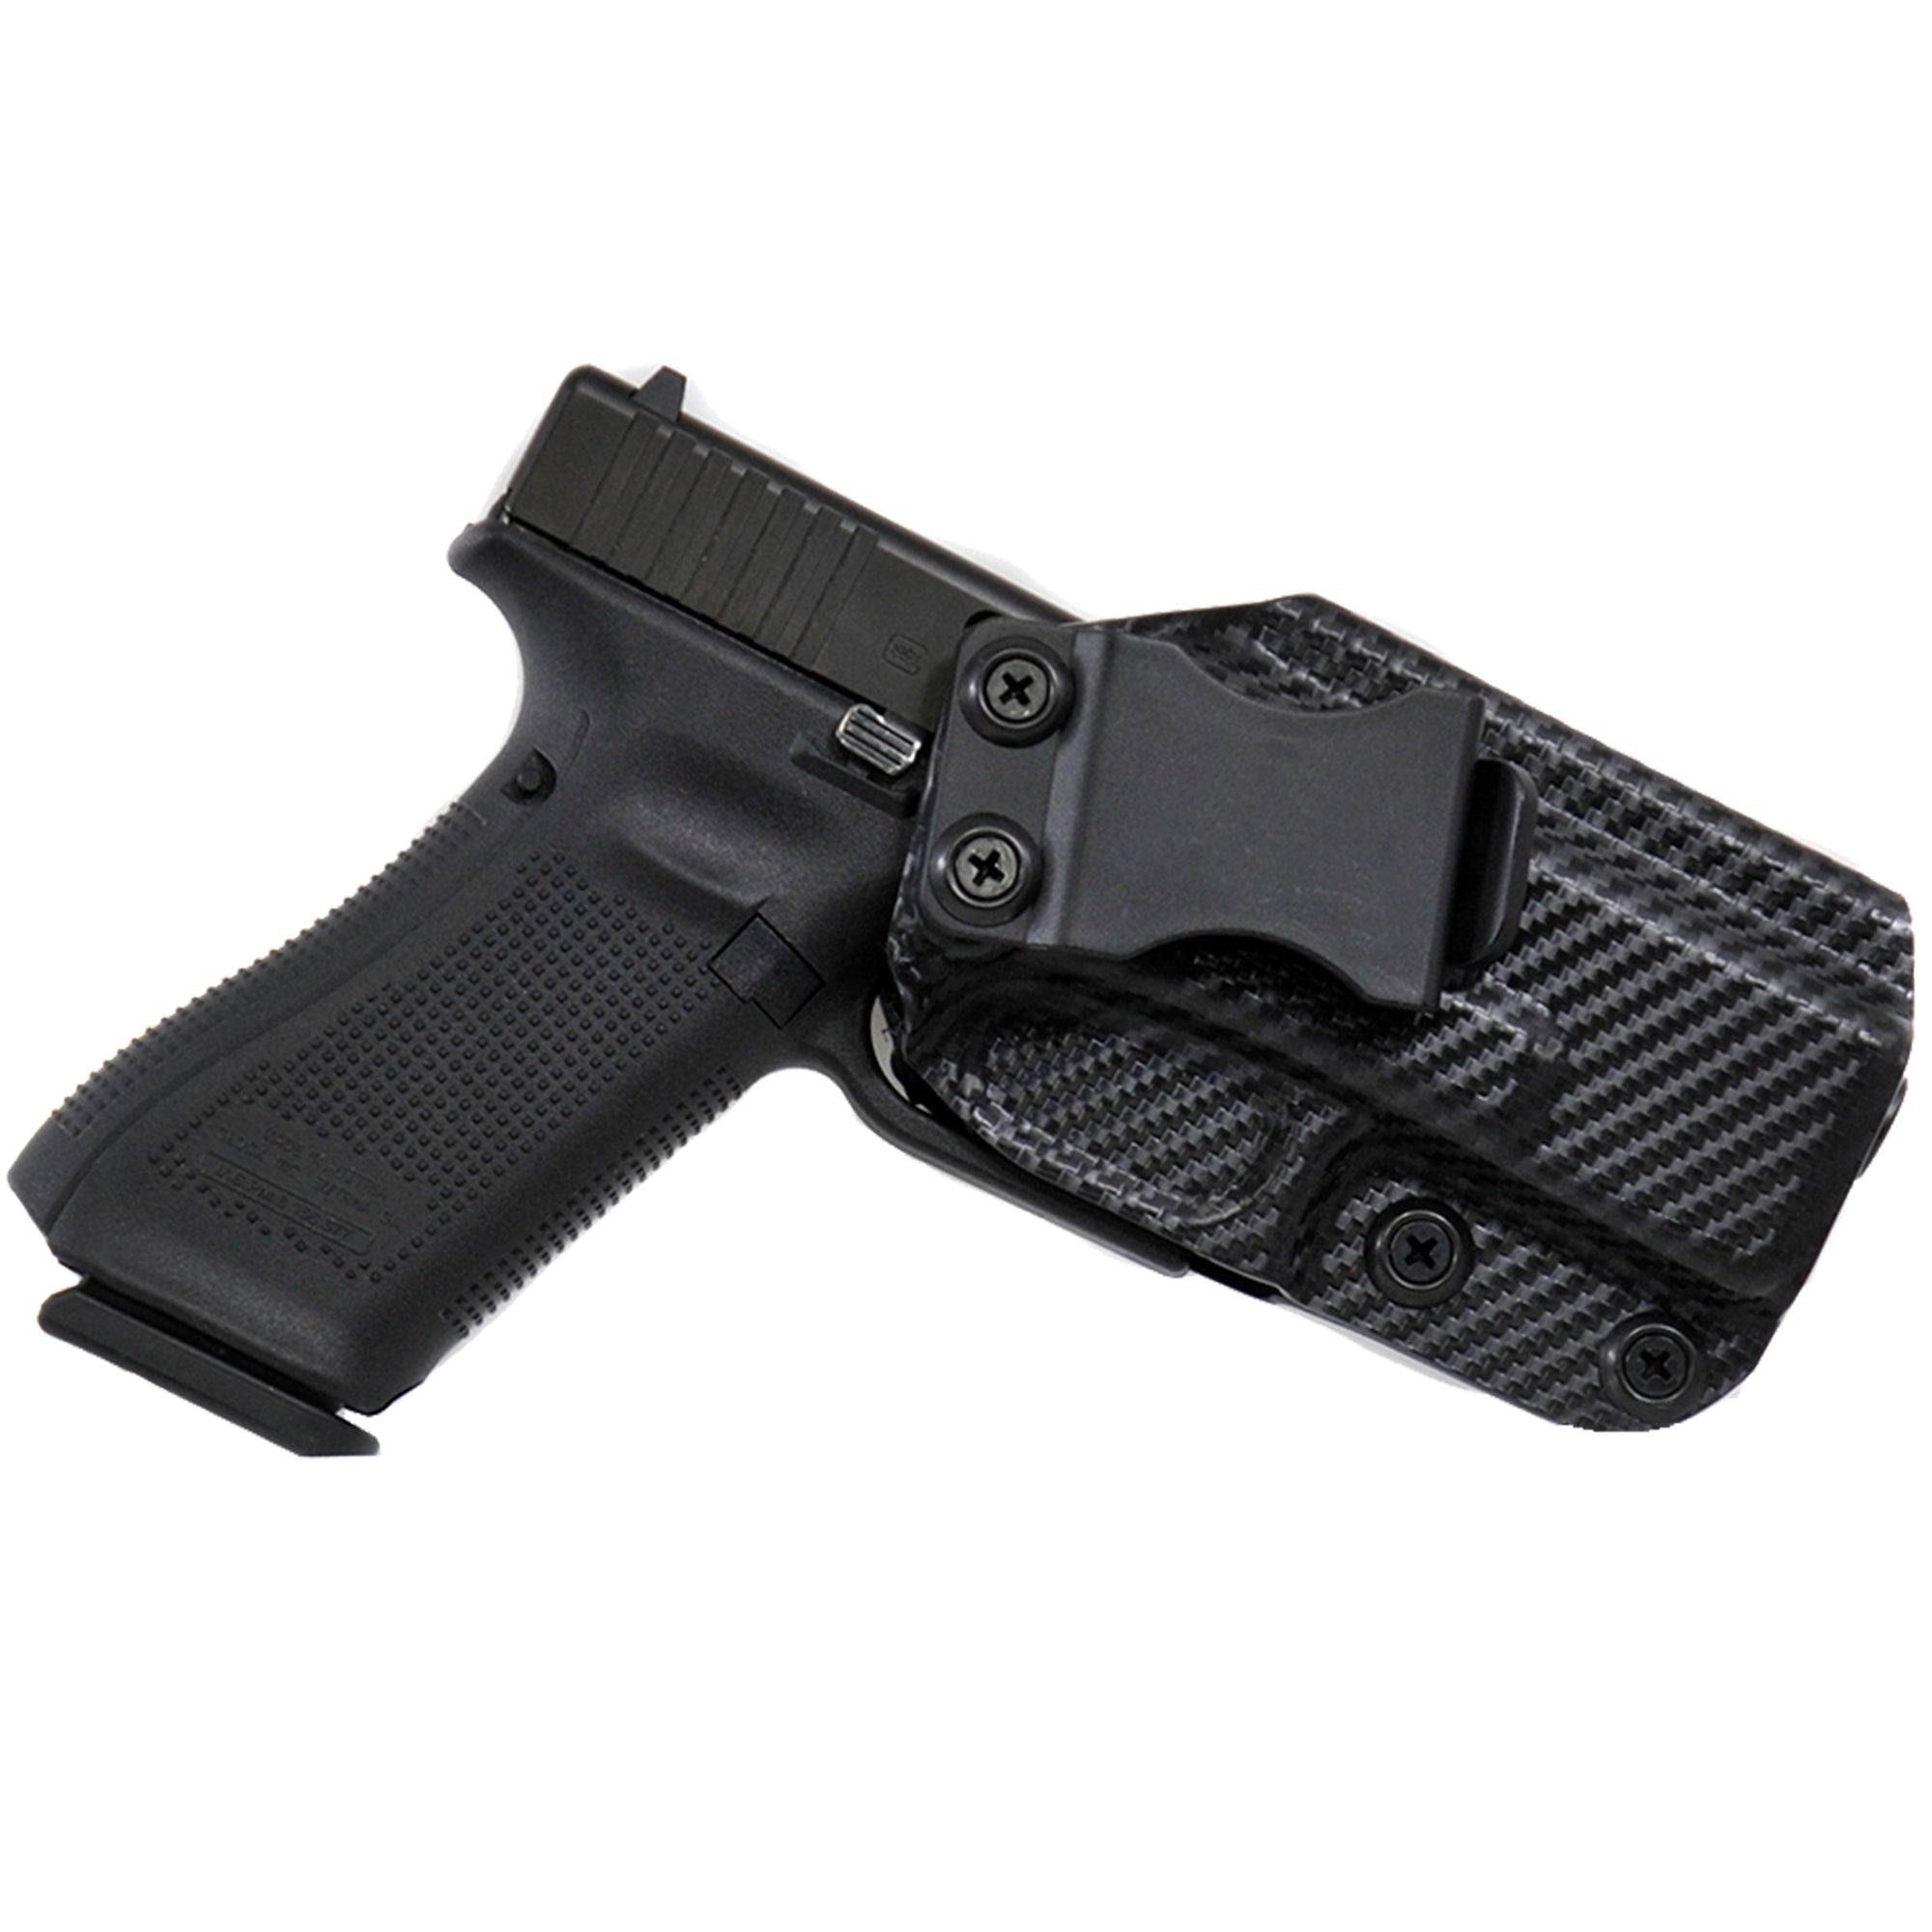  Special Ops IWB Belt Clip Holster With Sewn-On Mag  Pouch with Kydex Insert (Fits Glock 17, 19, 26, 30)